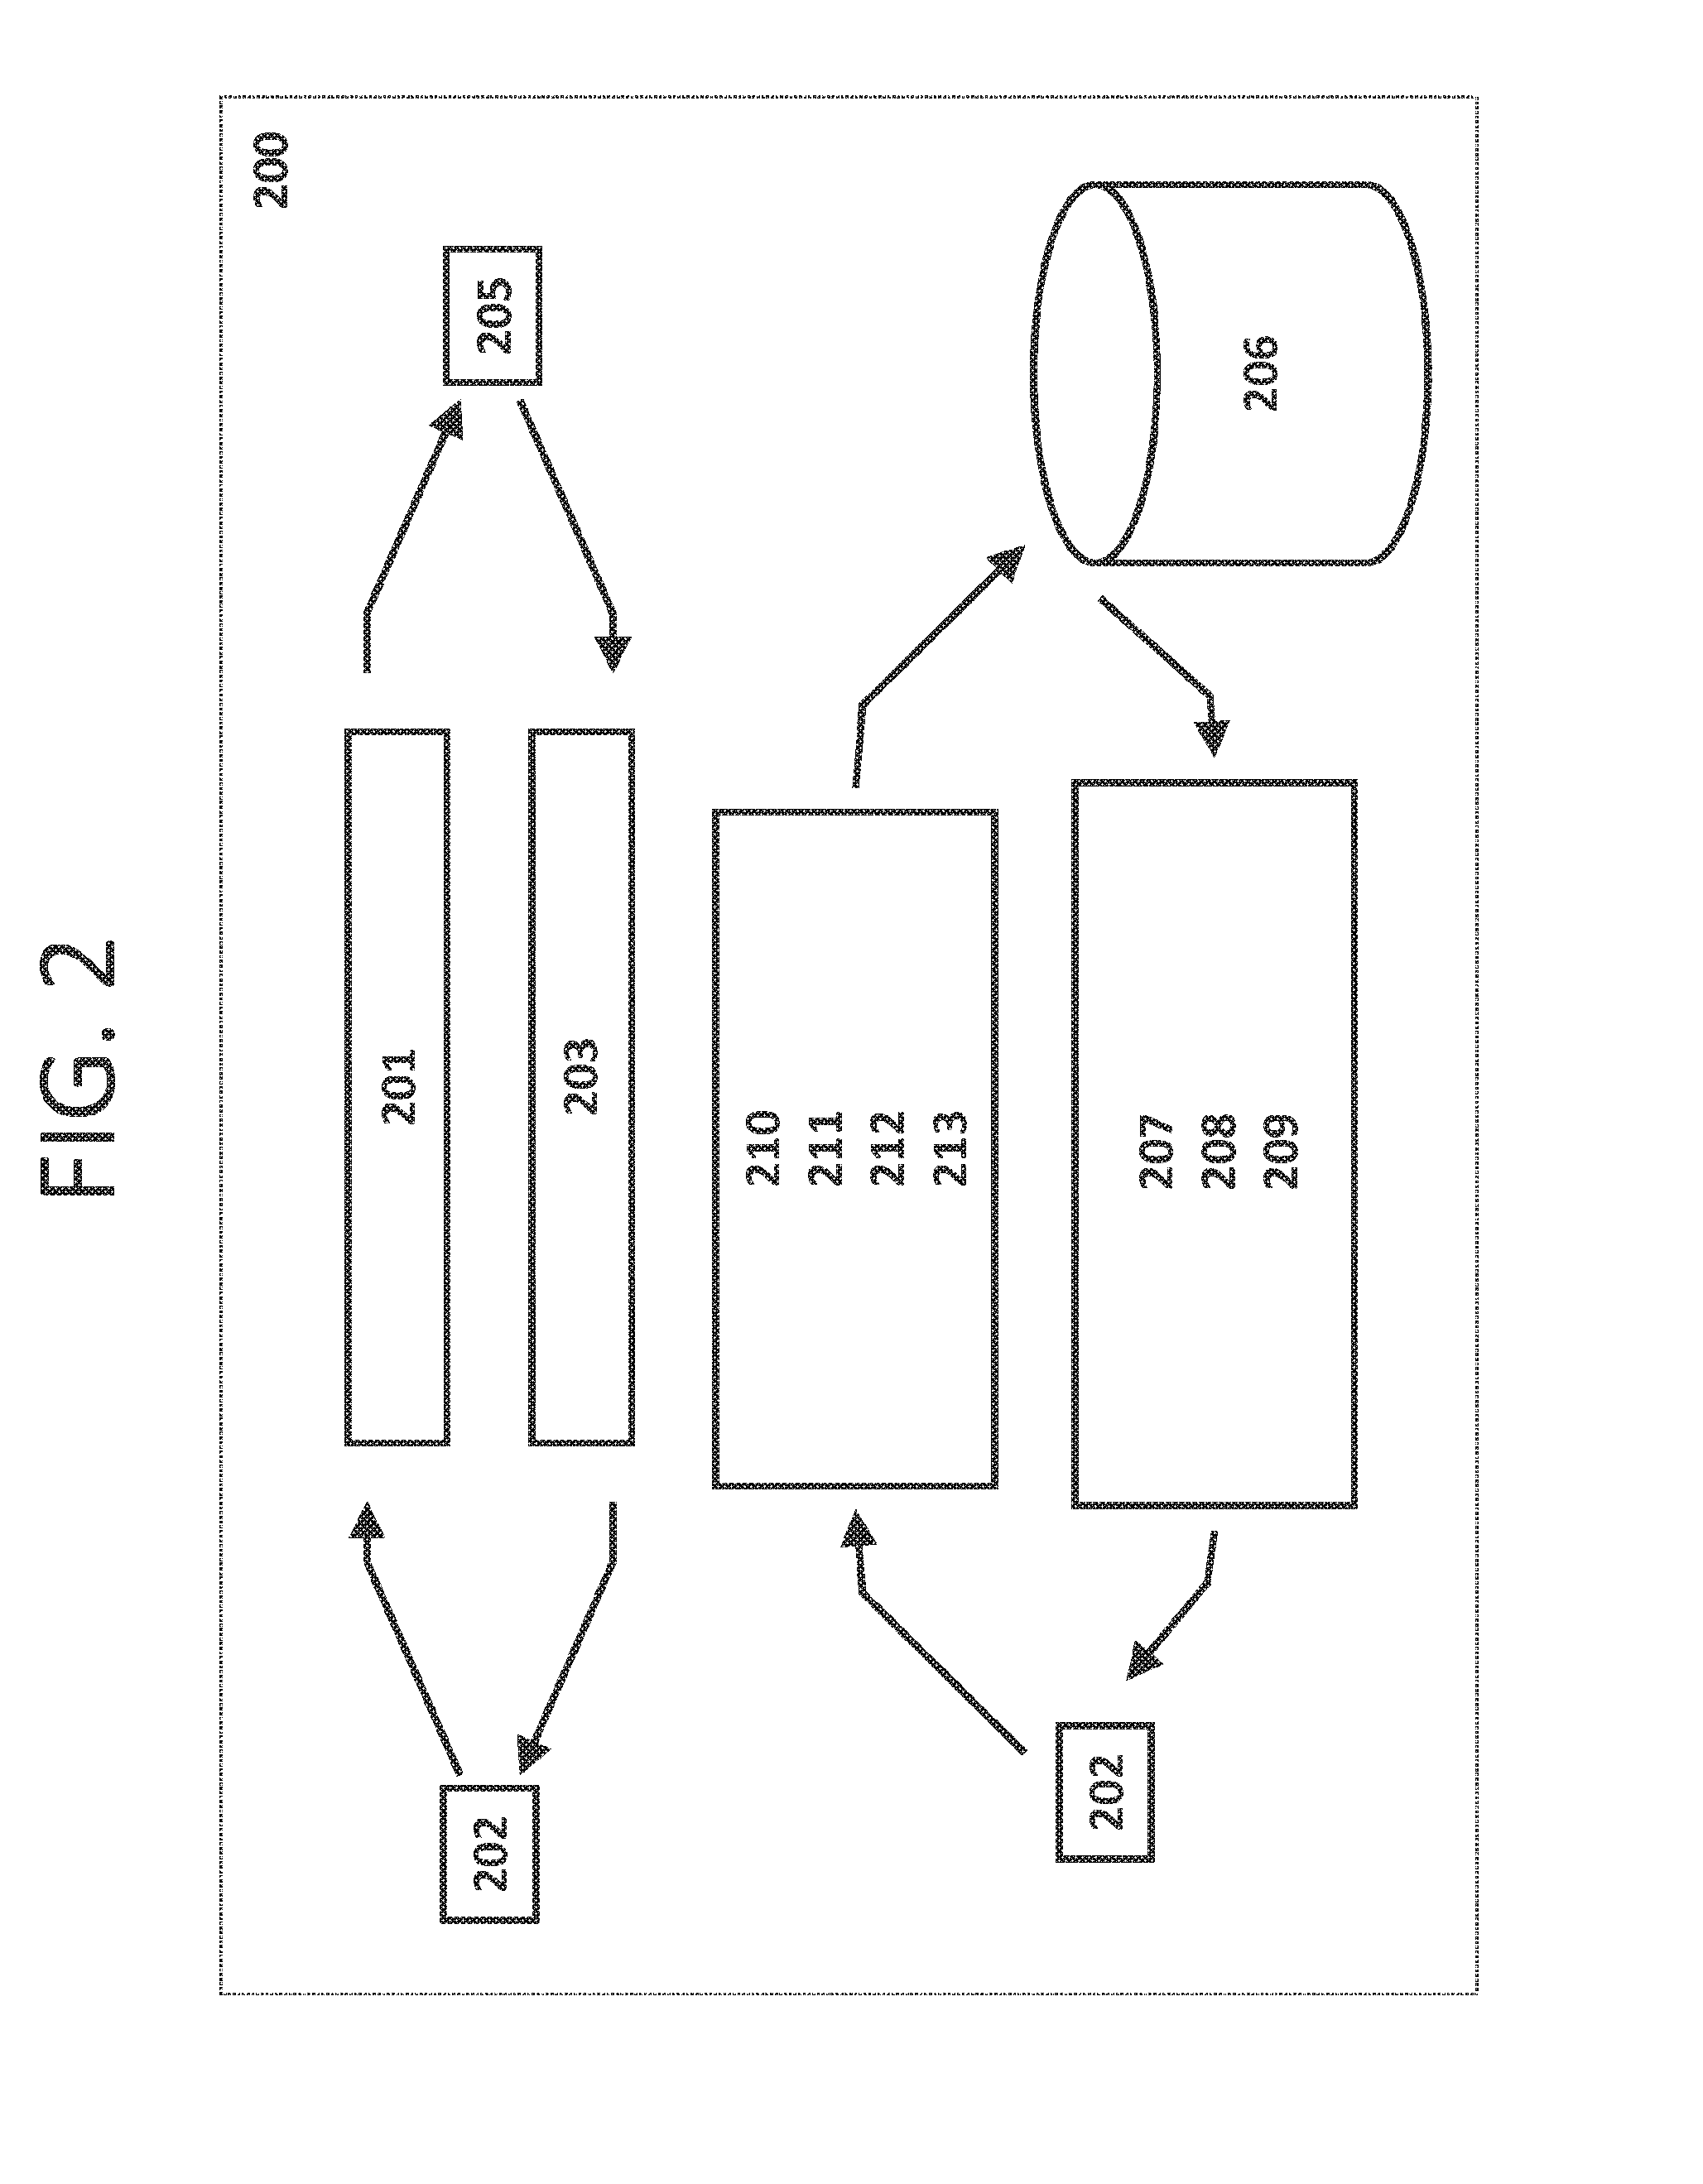 Distributed programmable connection method to establish peer-to-peer multimedia interactions